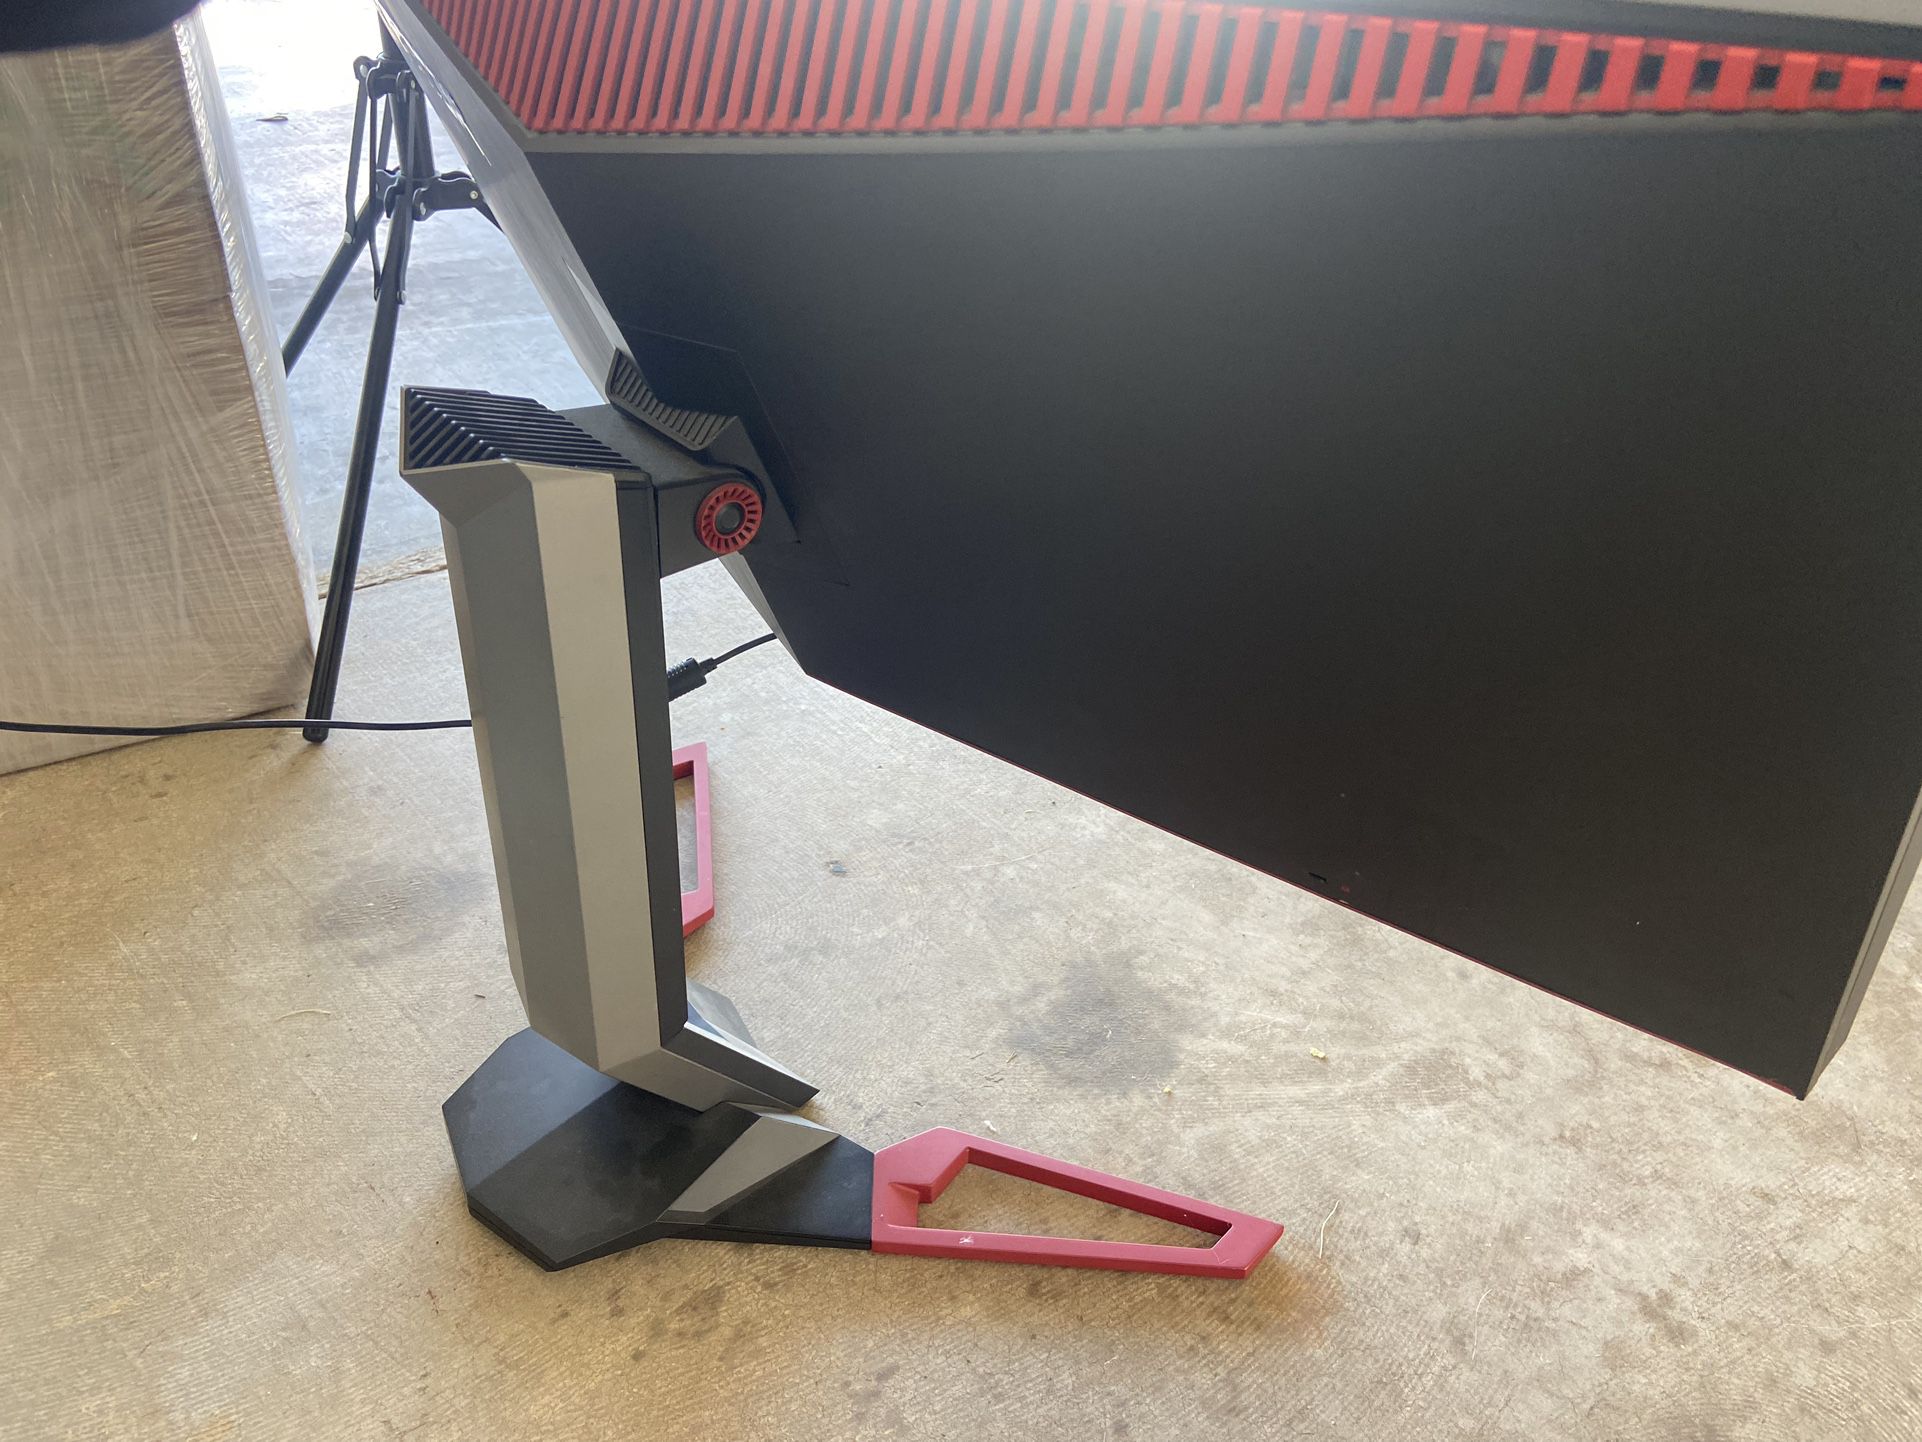 Acer Predator Gaming Curved Monitor